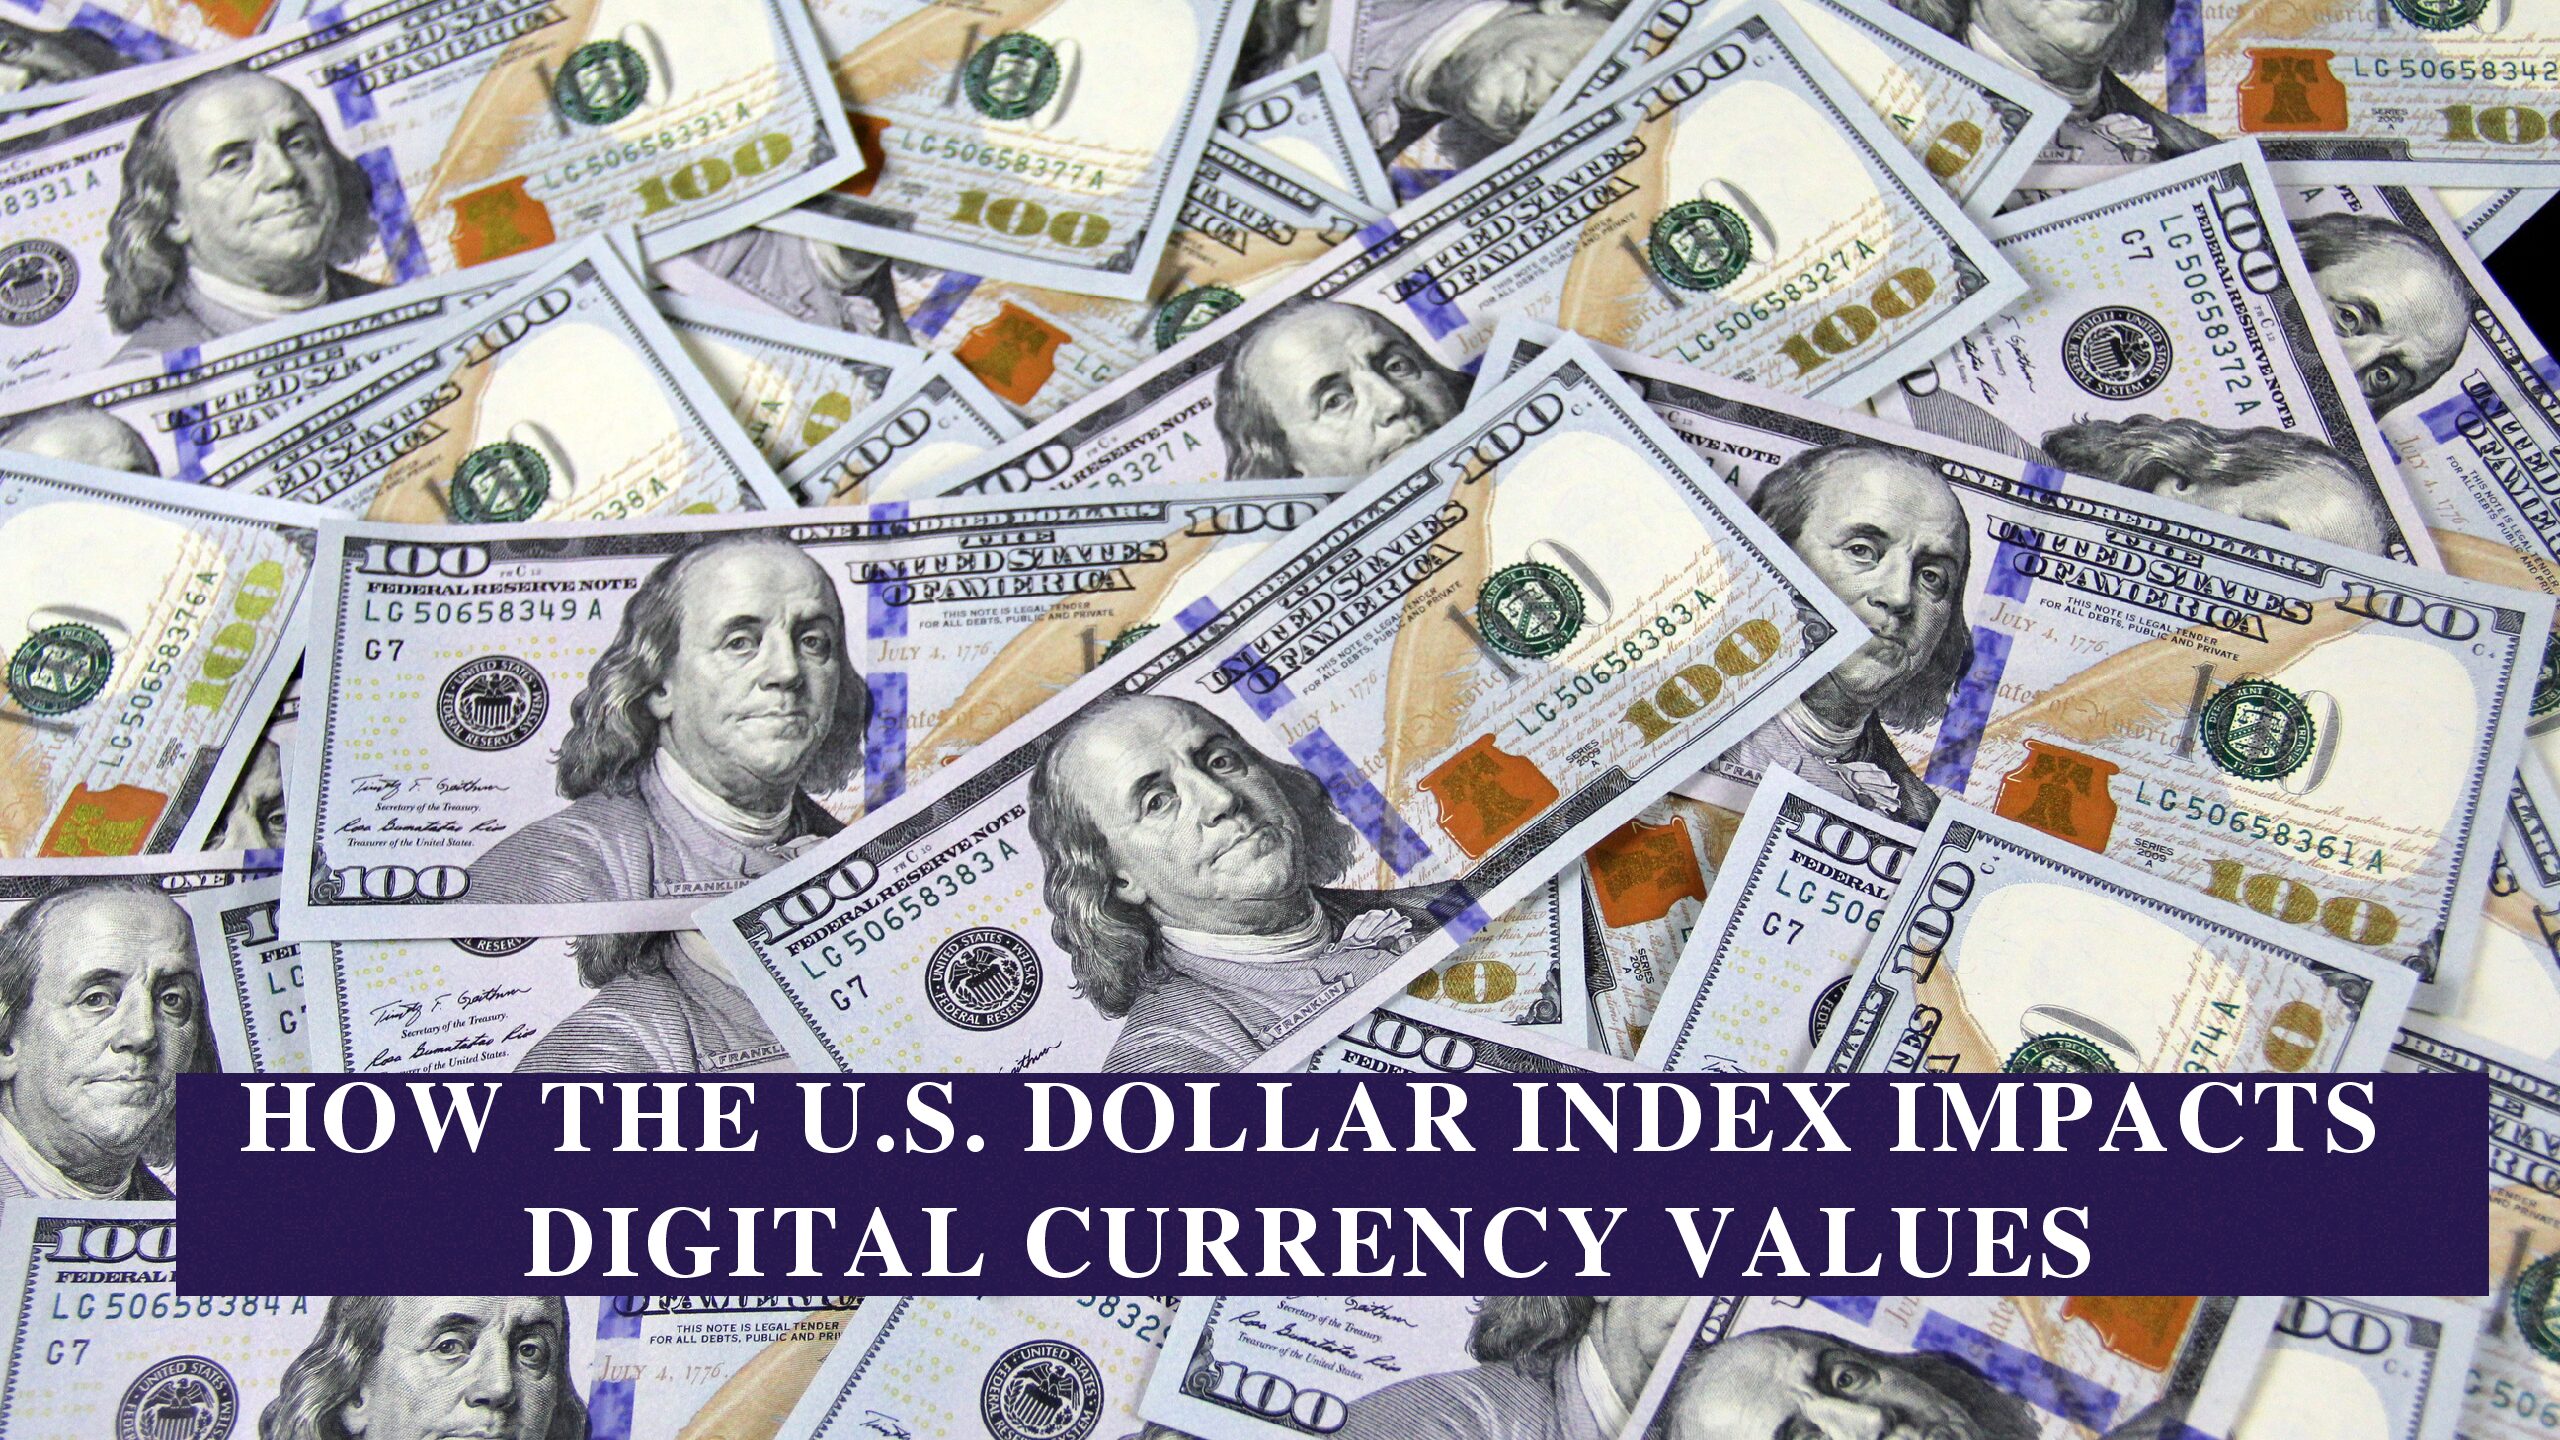 Macro Markets and Cryptocurrencies: How the U.S. Dollar Index Impacts Digital Currency Values